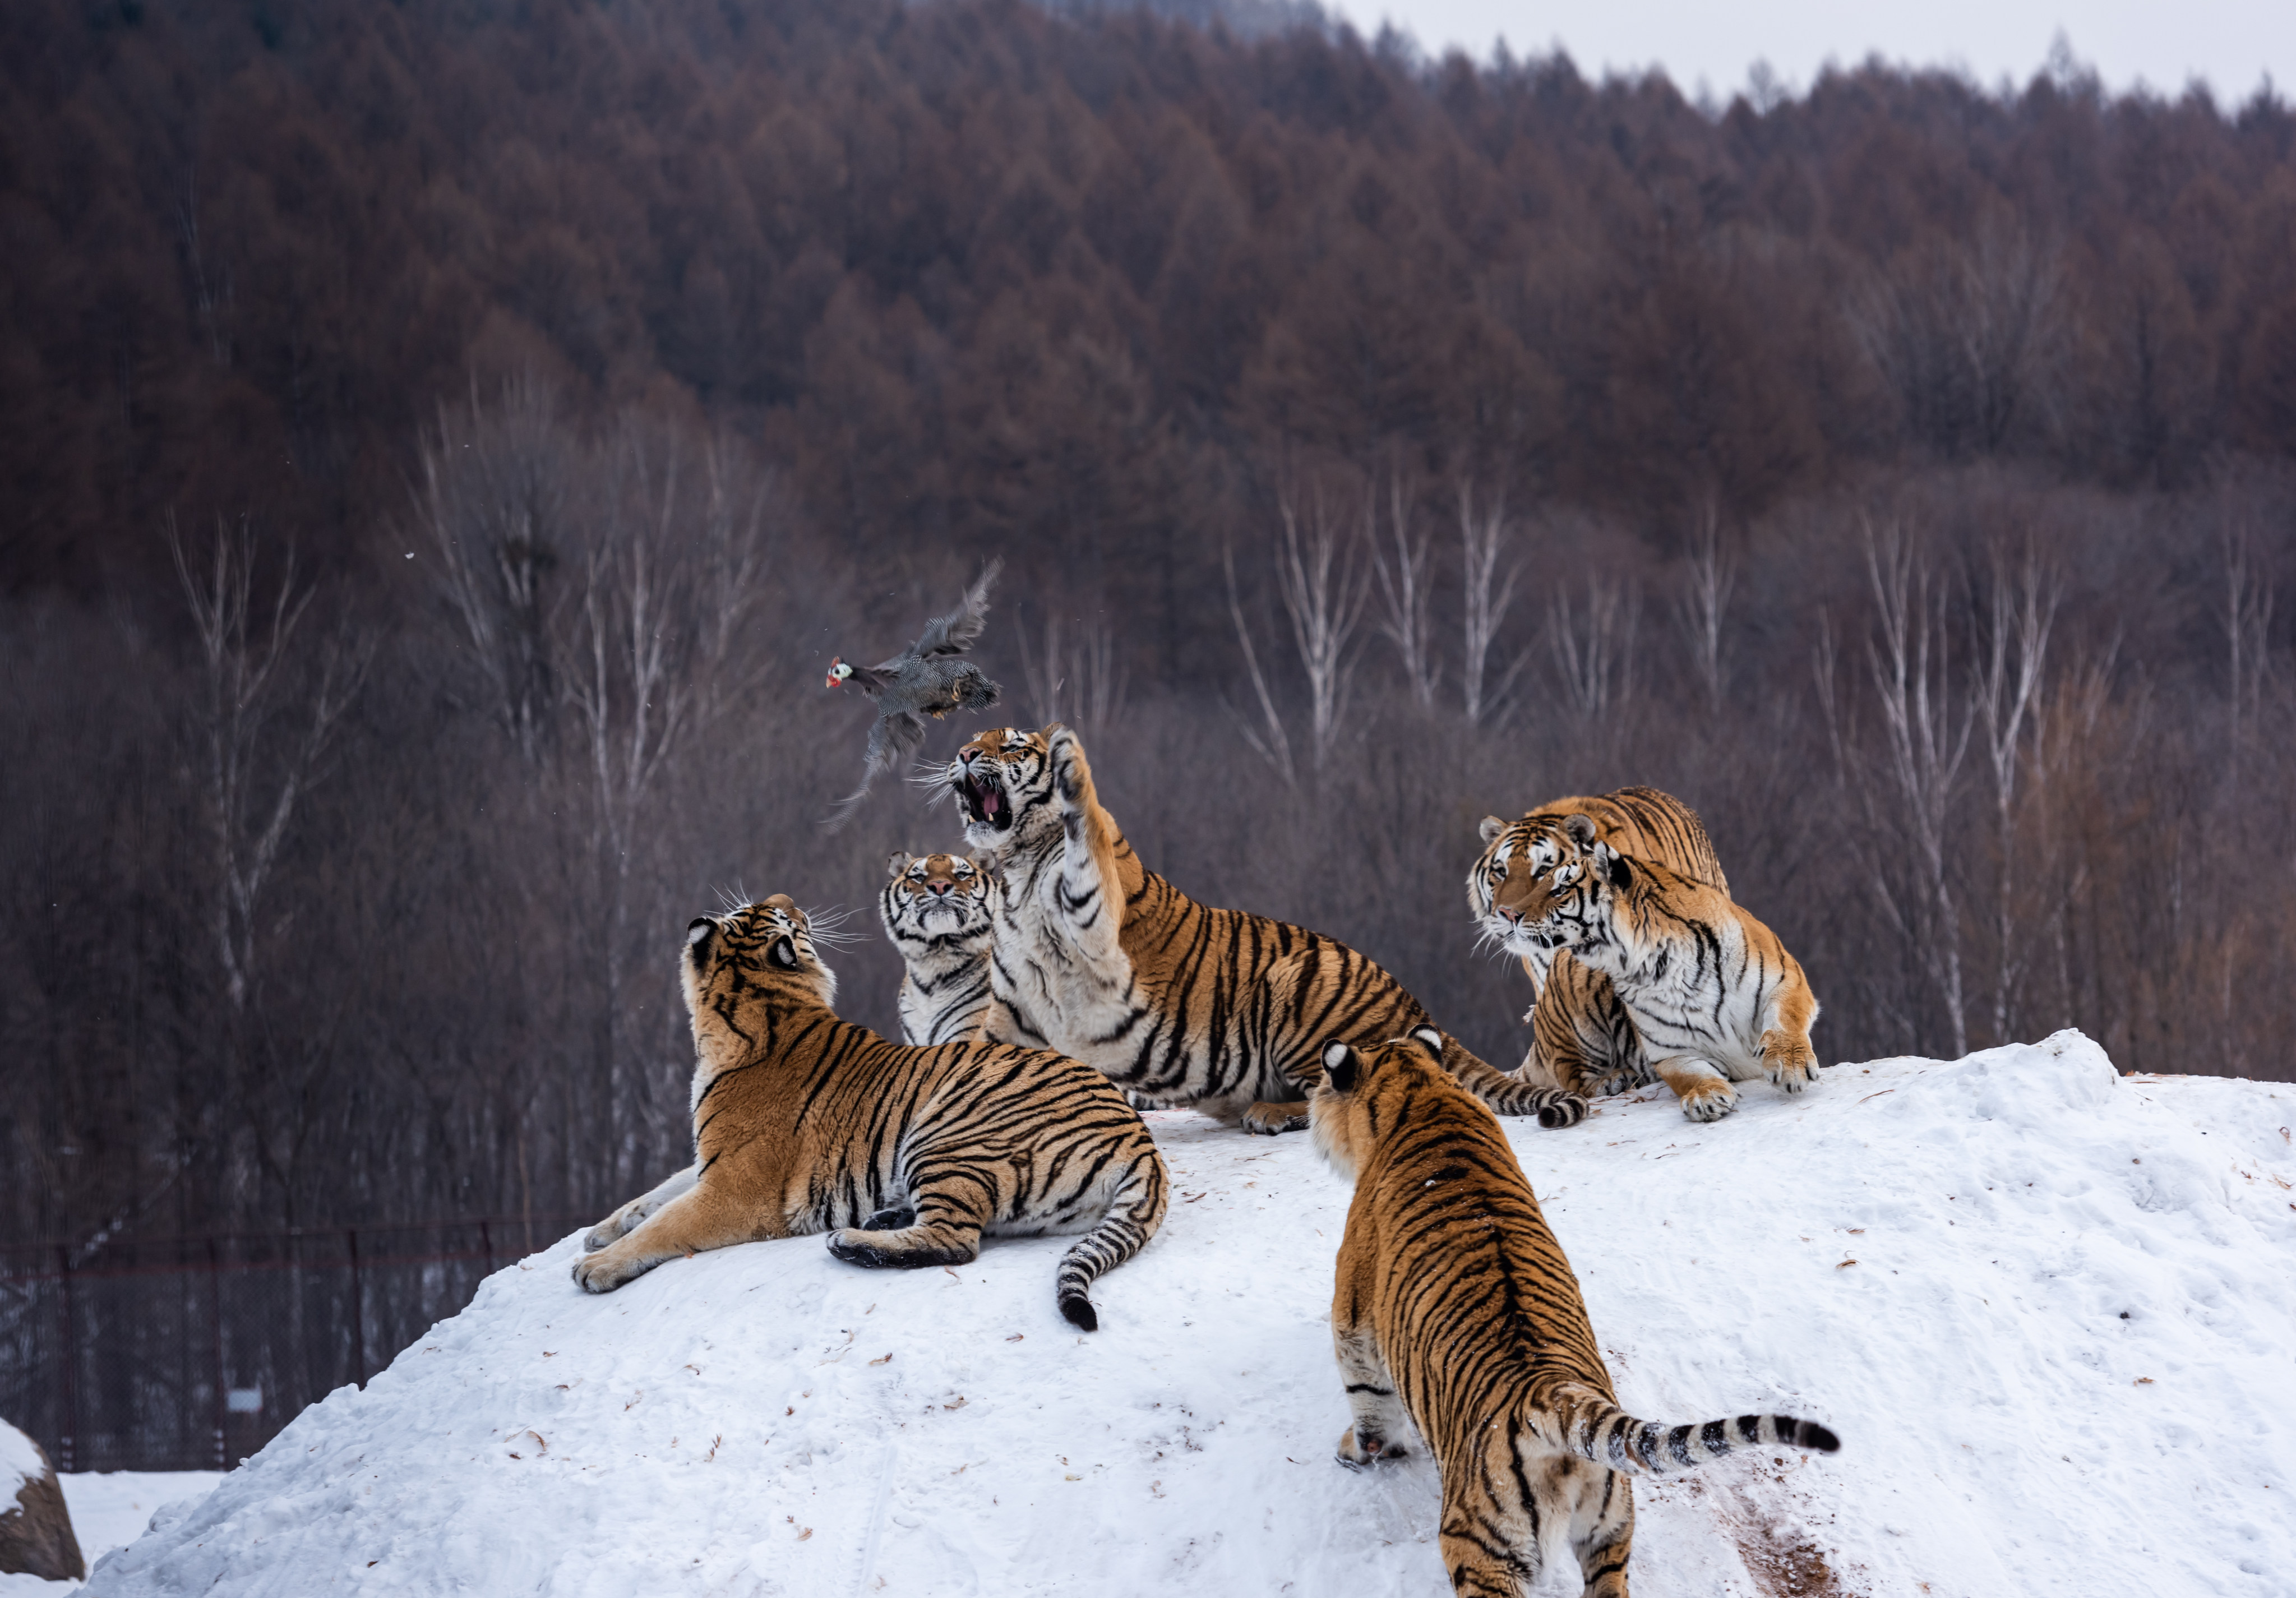 A team of scientists believe they have identified a lineage of tigers that never evolved into modern species. Photo: Getty Images